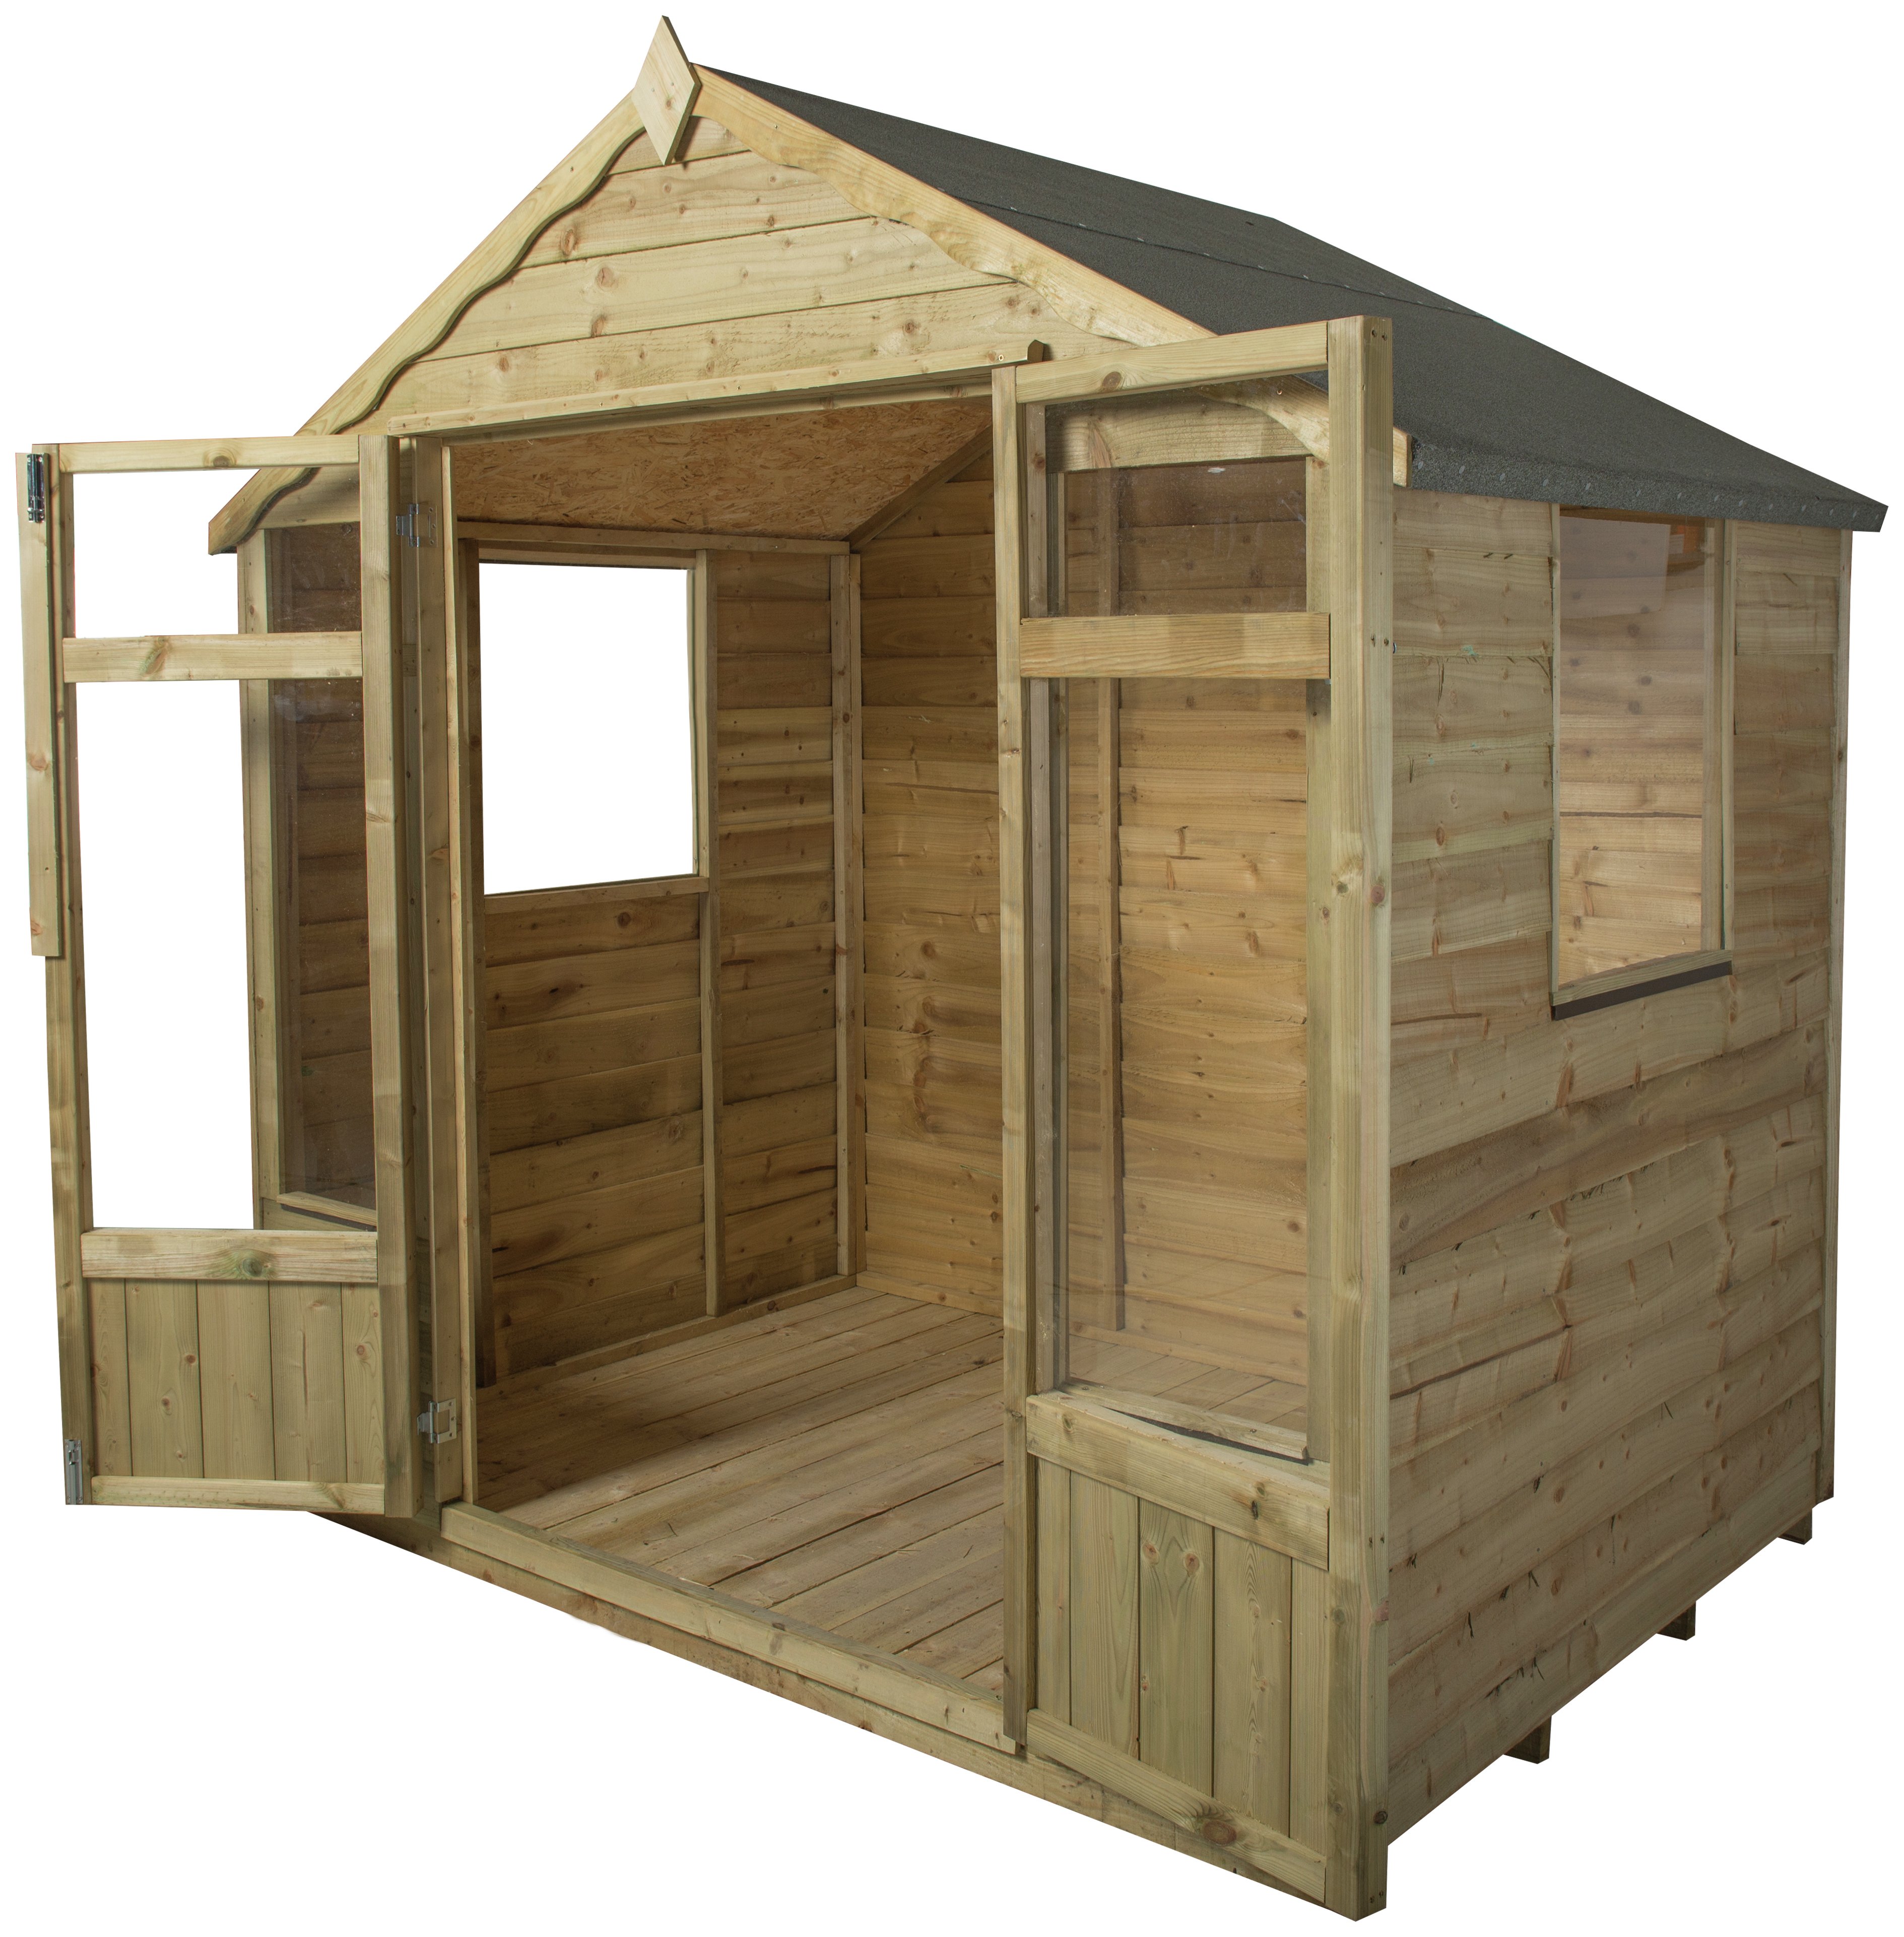 Forest Oakley Summerhouse 7 x 5ft. at Argos review